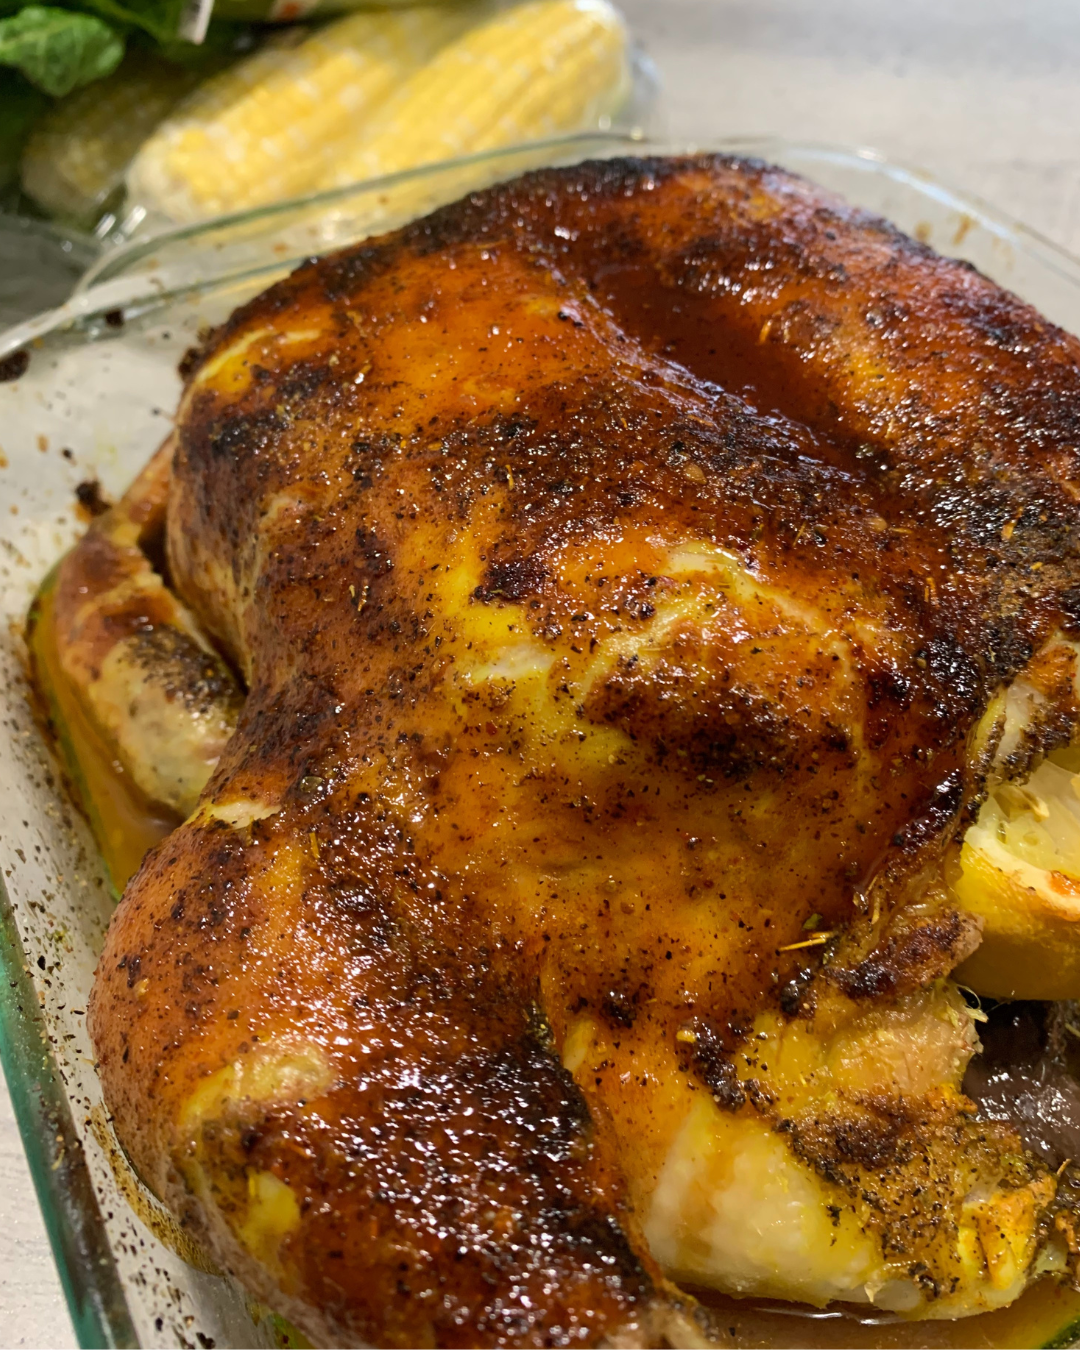 Roasted Whole Chicken with corn on the cob